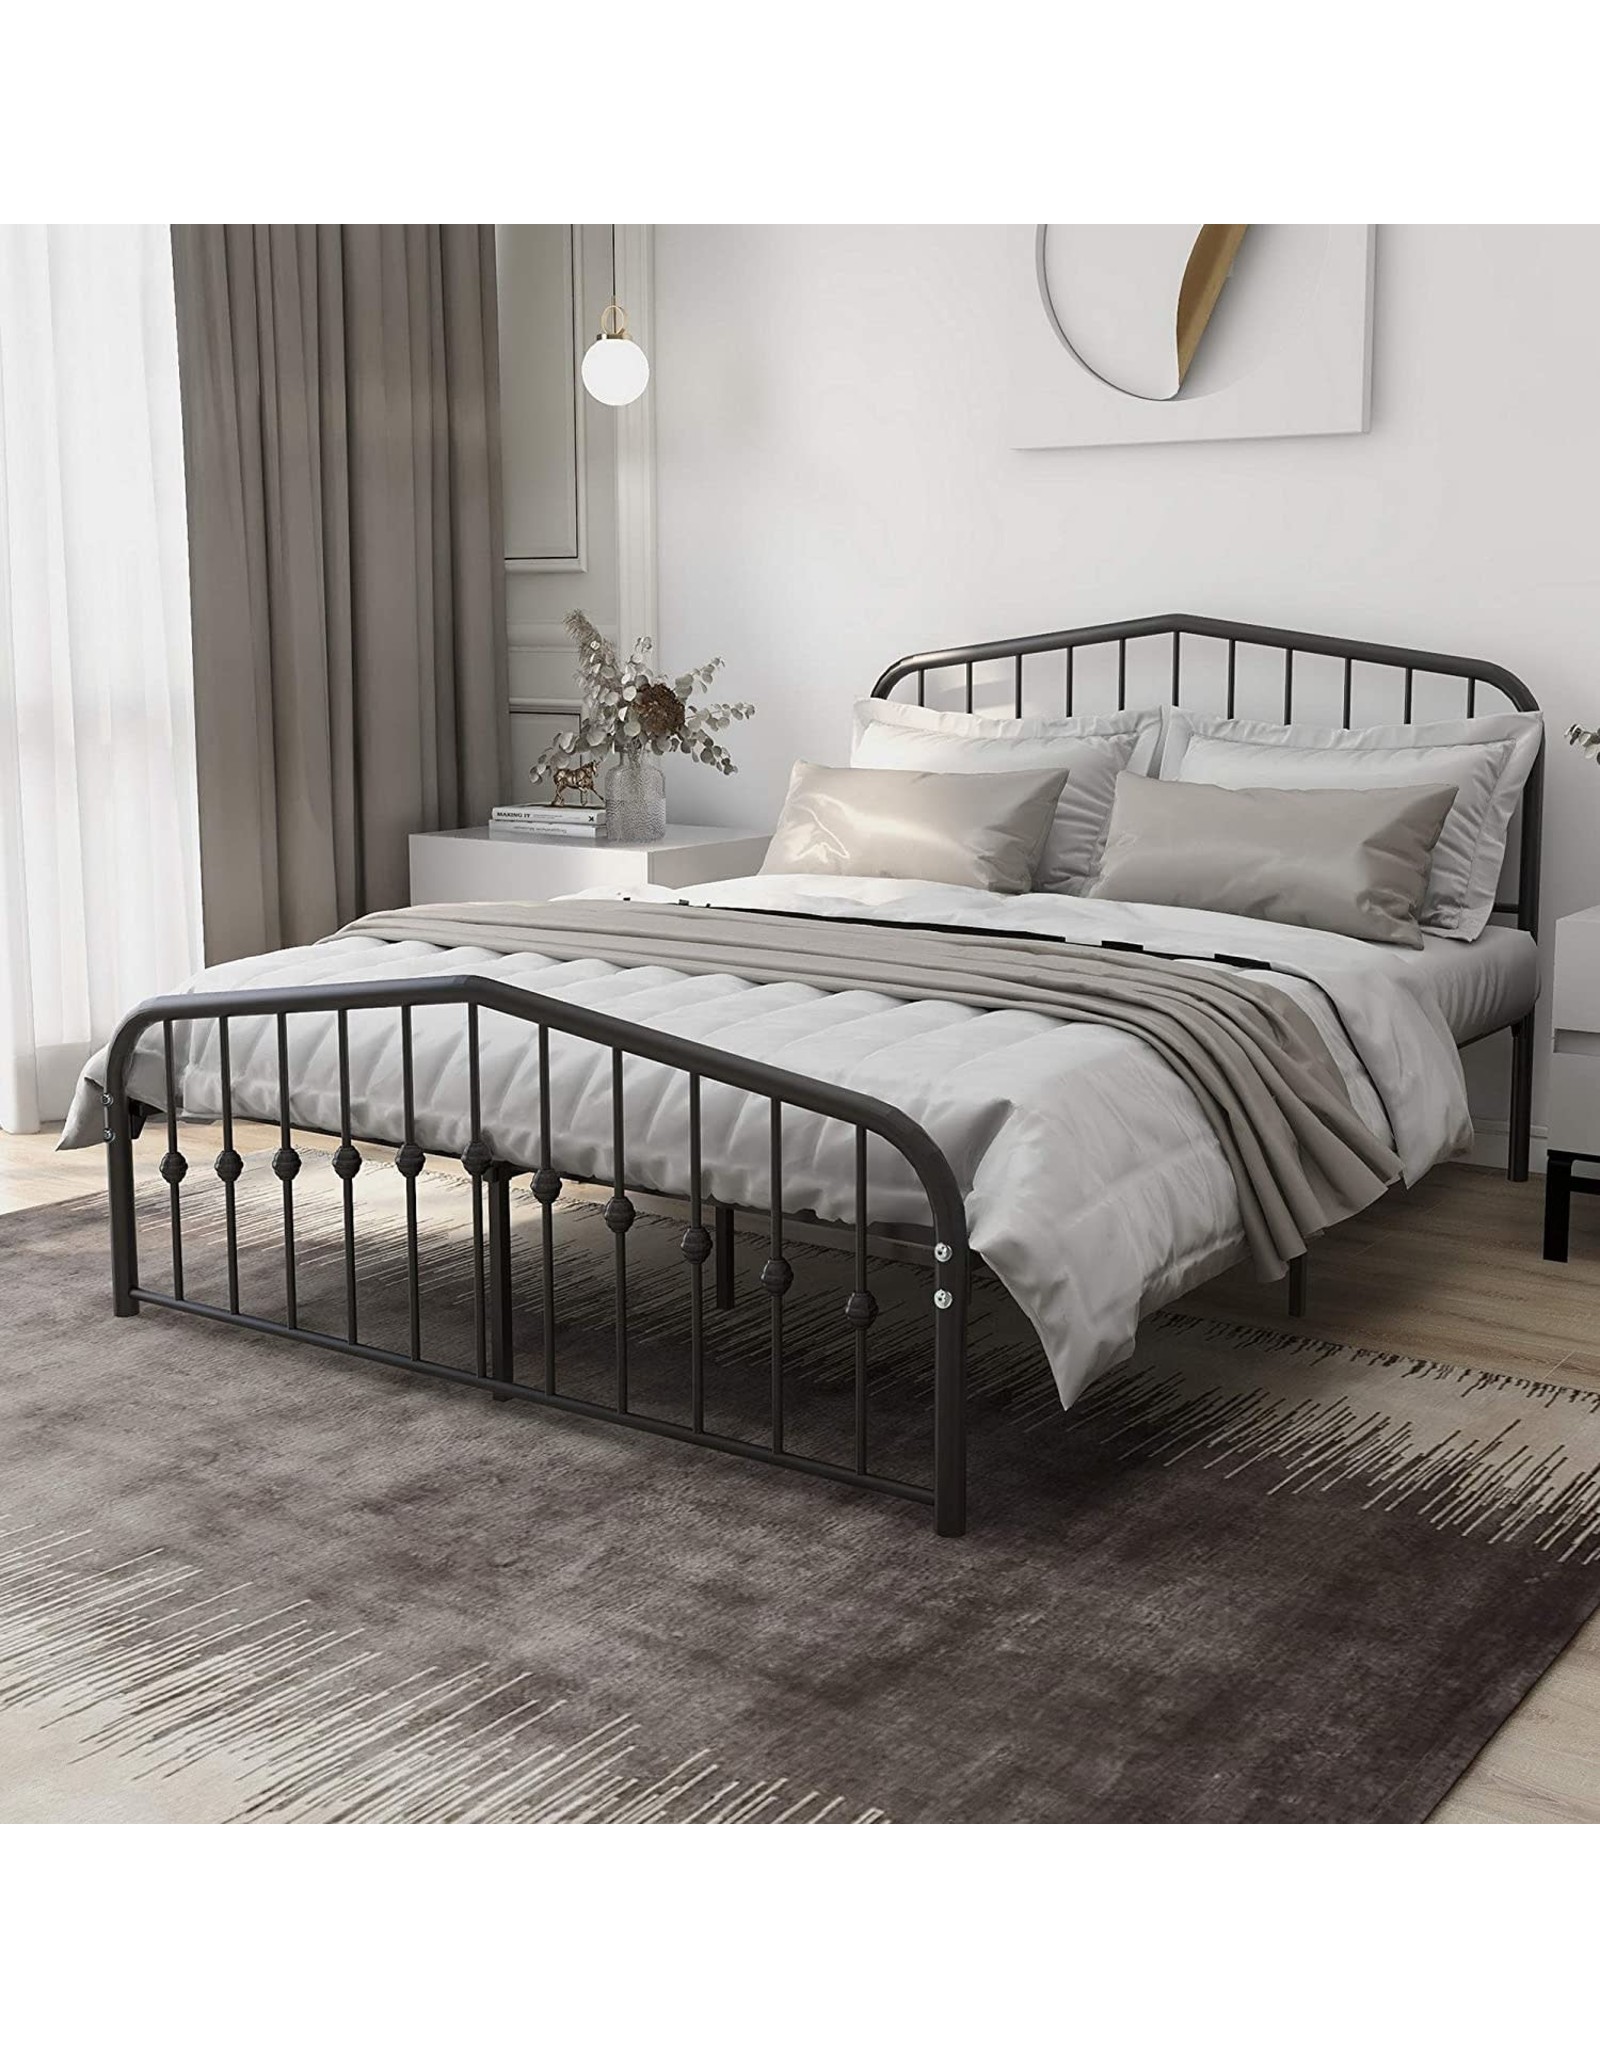 Aufank Metal Bed Frame Queen Size, Metal Bed Frame Queen Without Box Spring